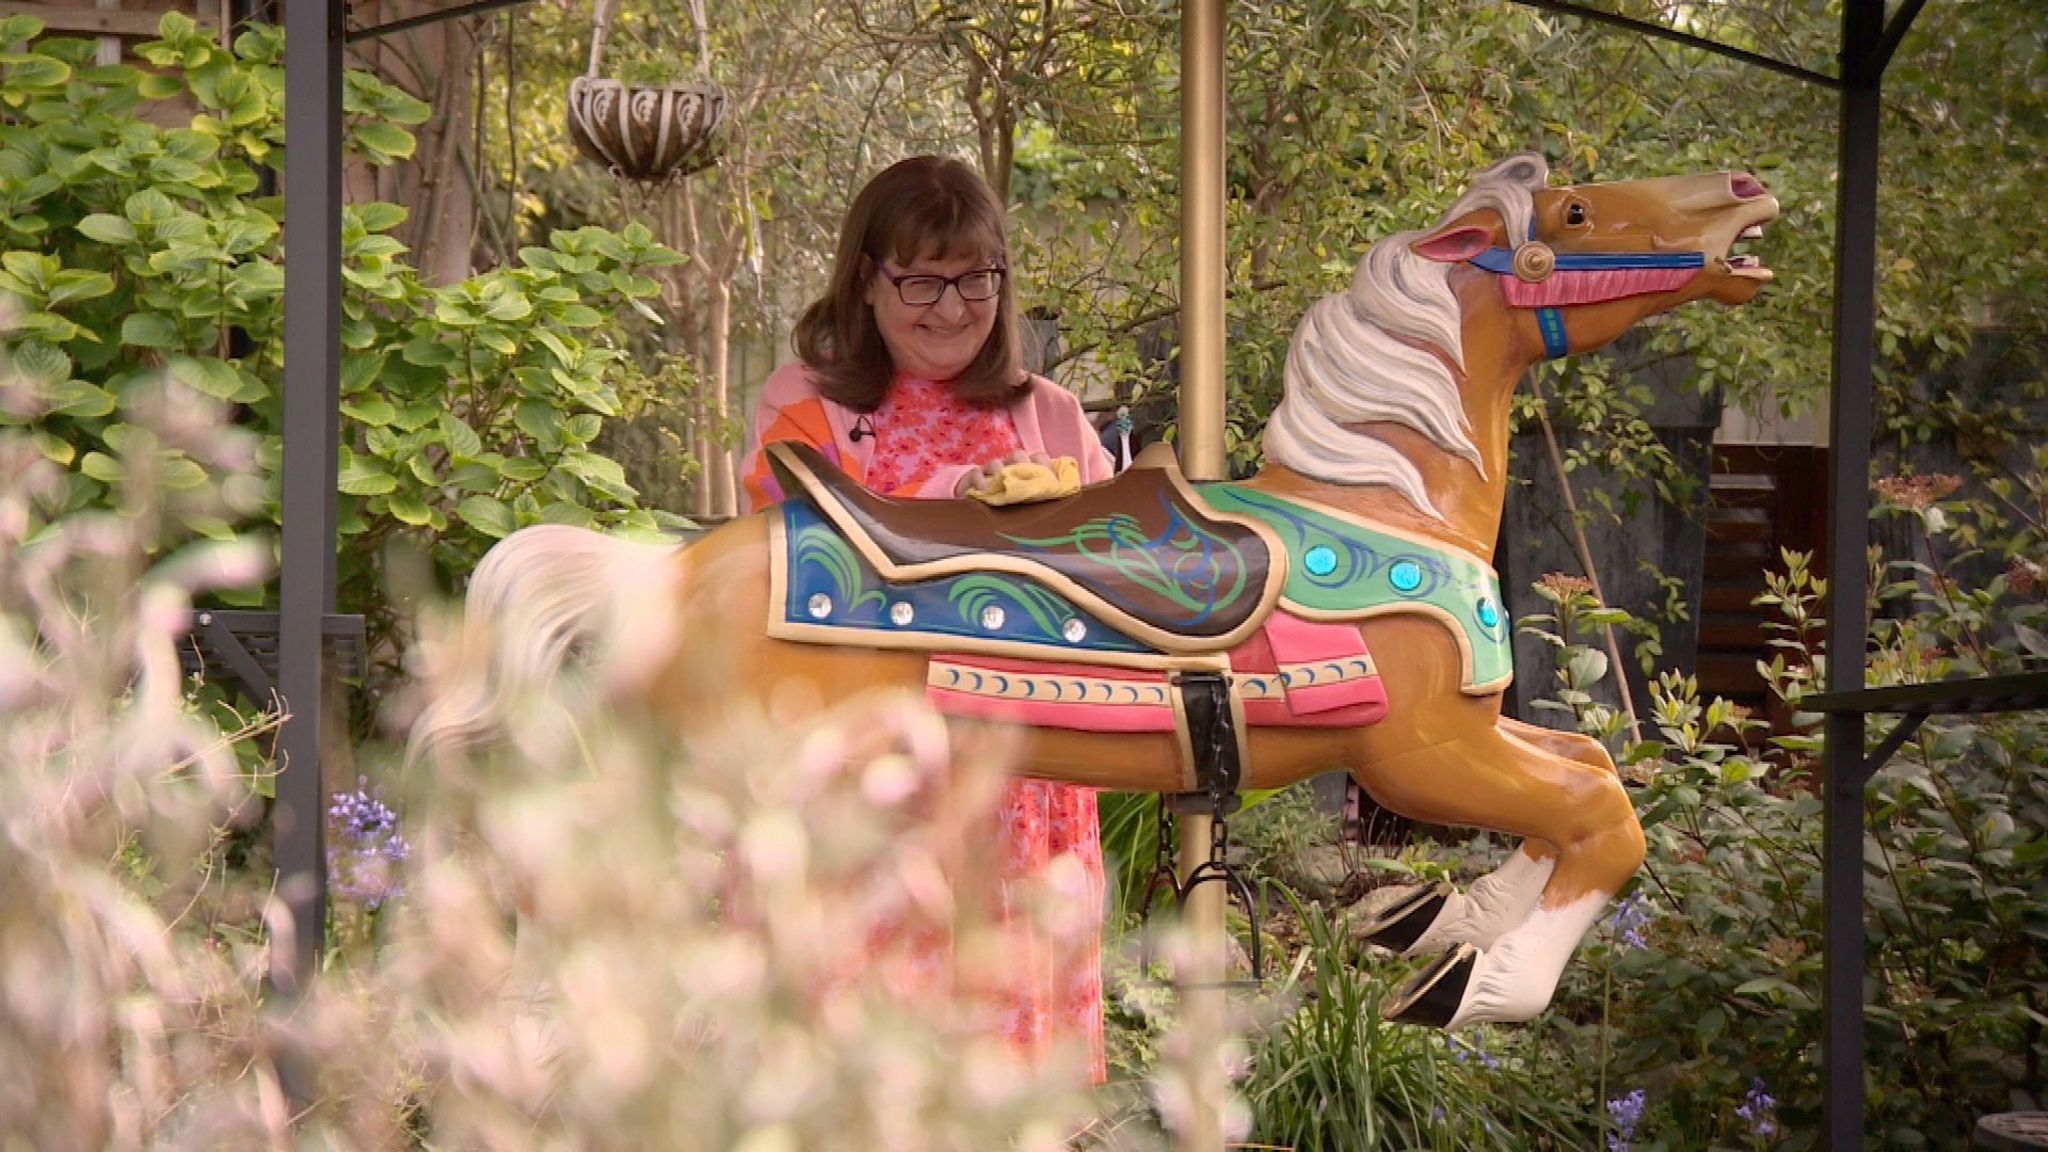 A woman cleans the saddle of a carousel horse in a garden